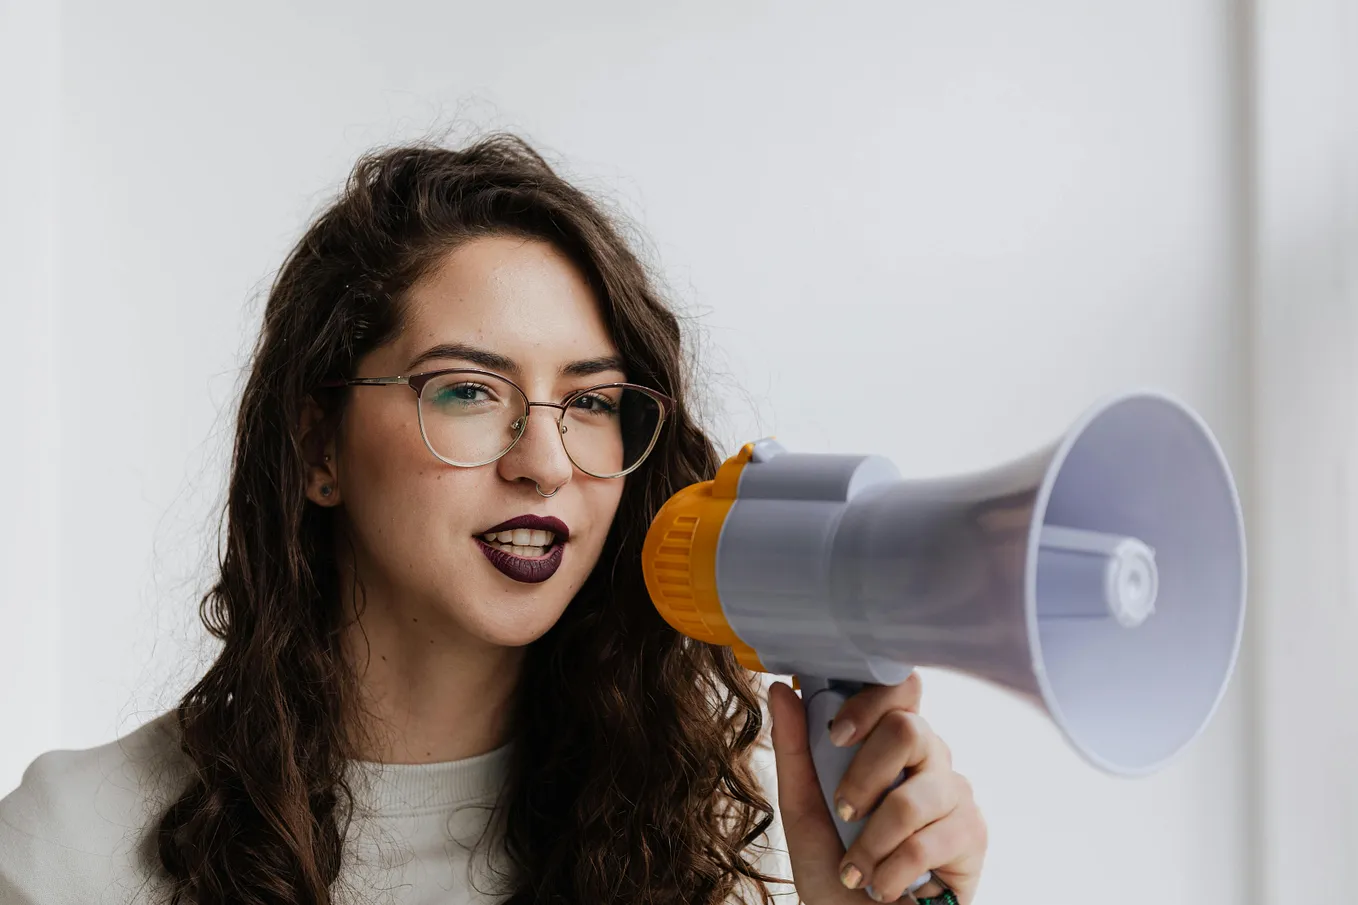 How to Use Brand-Building Tools to Find Your Writer Voice